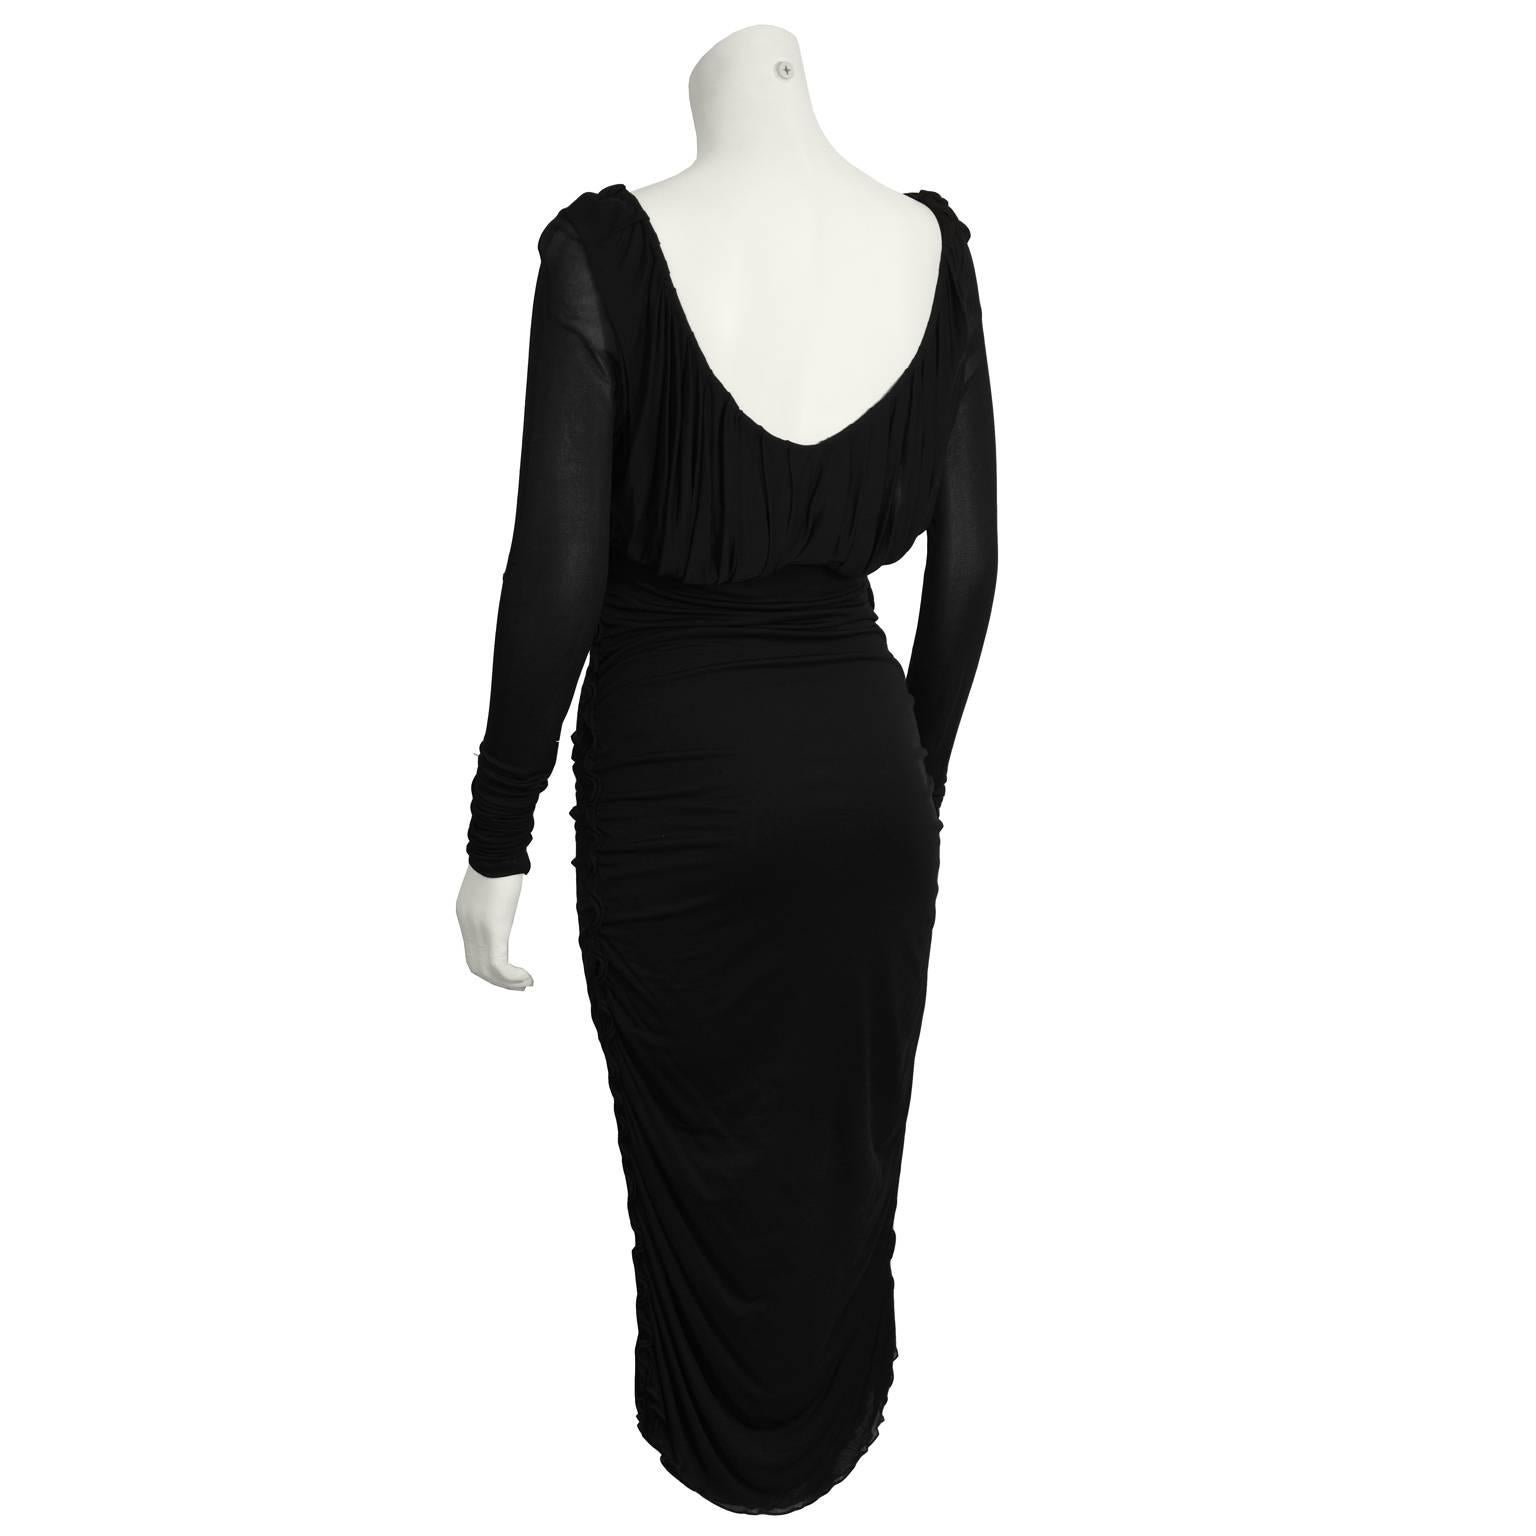 Fabulous Gucci long-sleeved ruched black jersey cocktail dress from the 2000's. This sleek body con dress has a deep scoop neckline with a loose fitting bodice, and gathered detailing on the sides. Lightweight. Stretch fit. Midi-length ensures a.m.